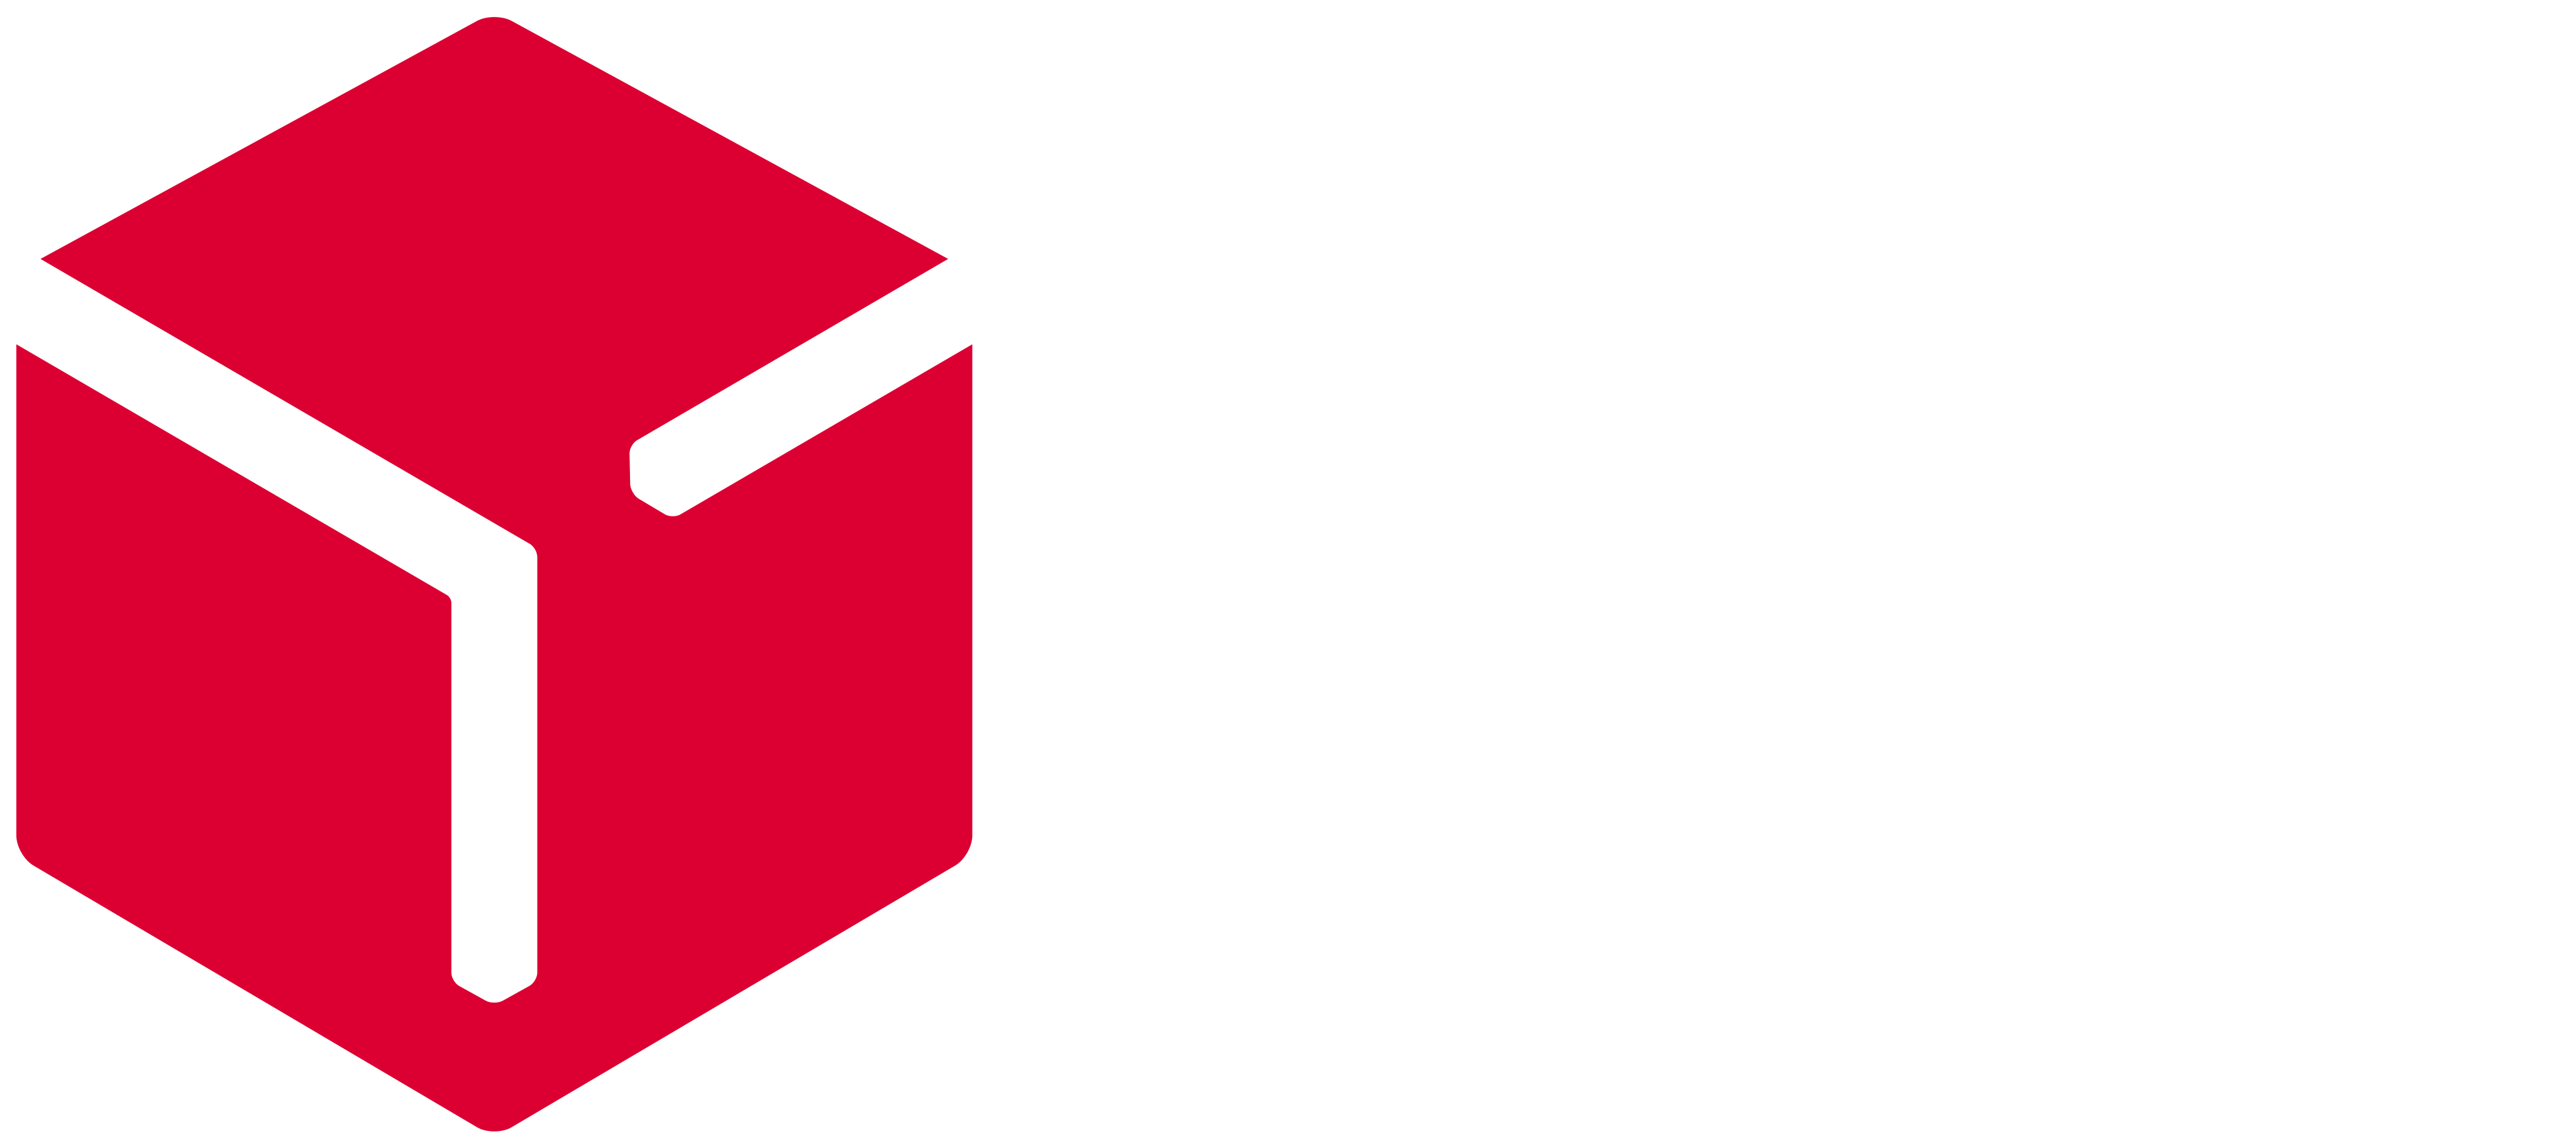 delivery-icon-1